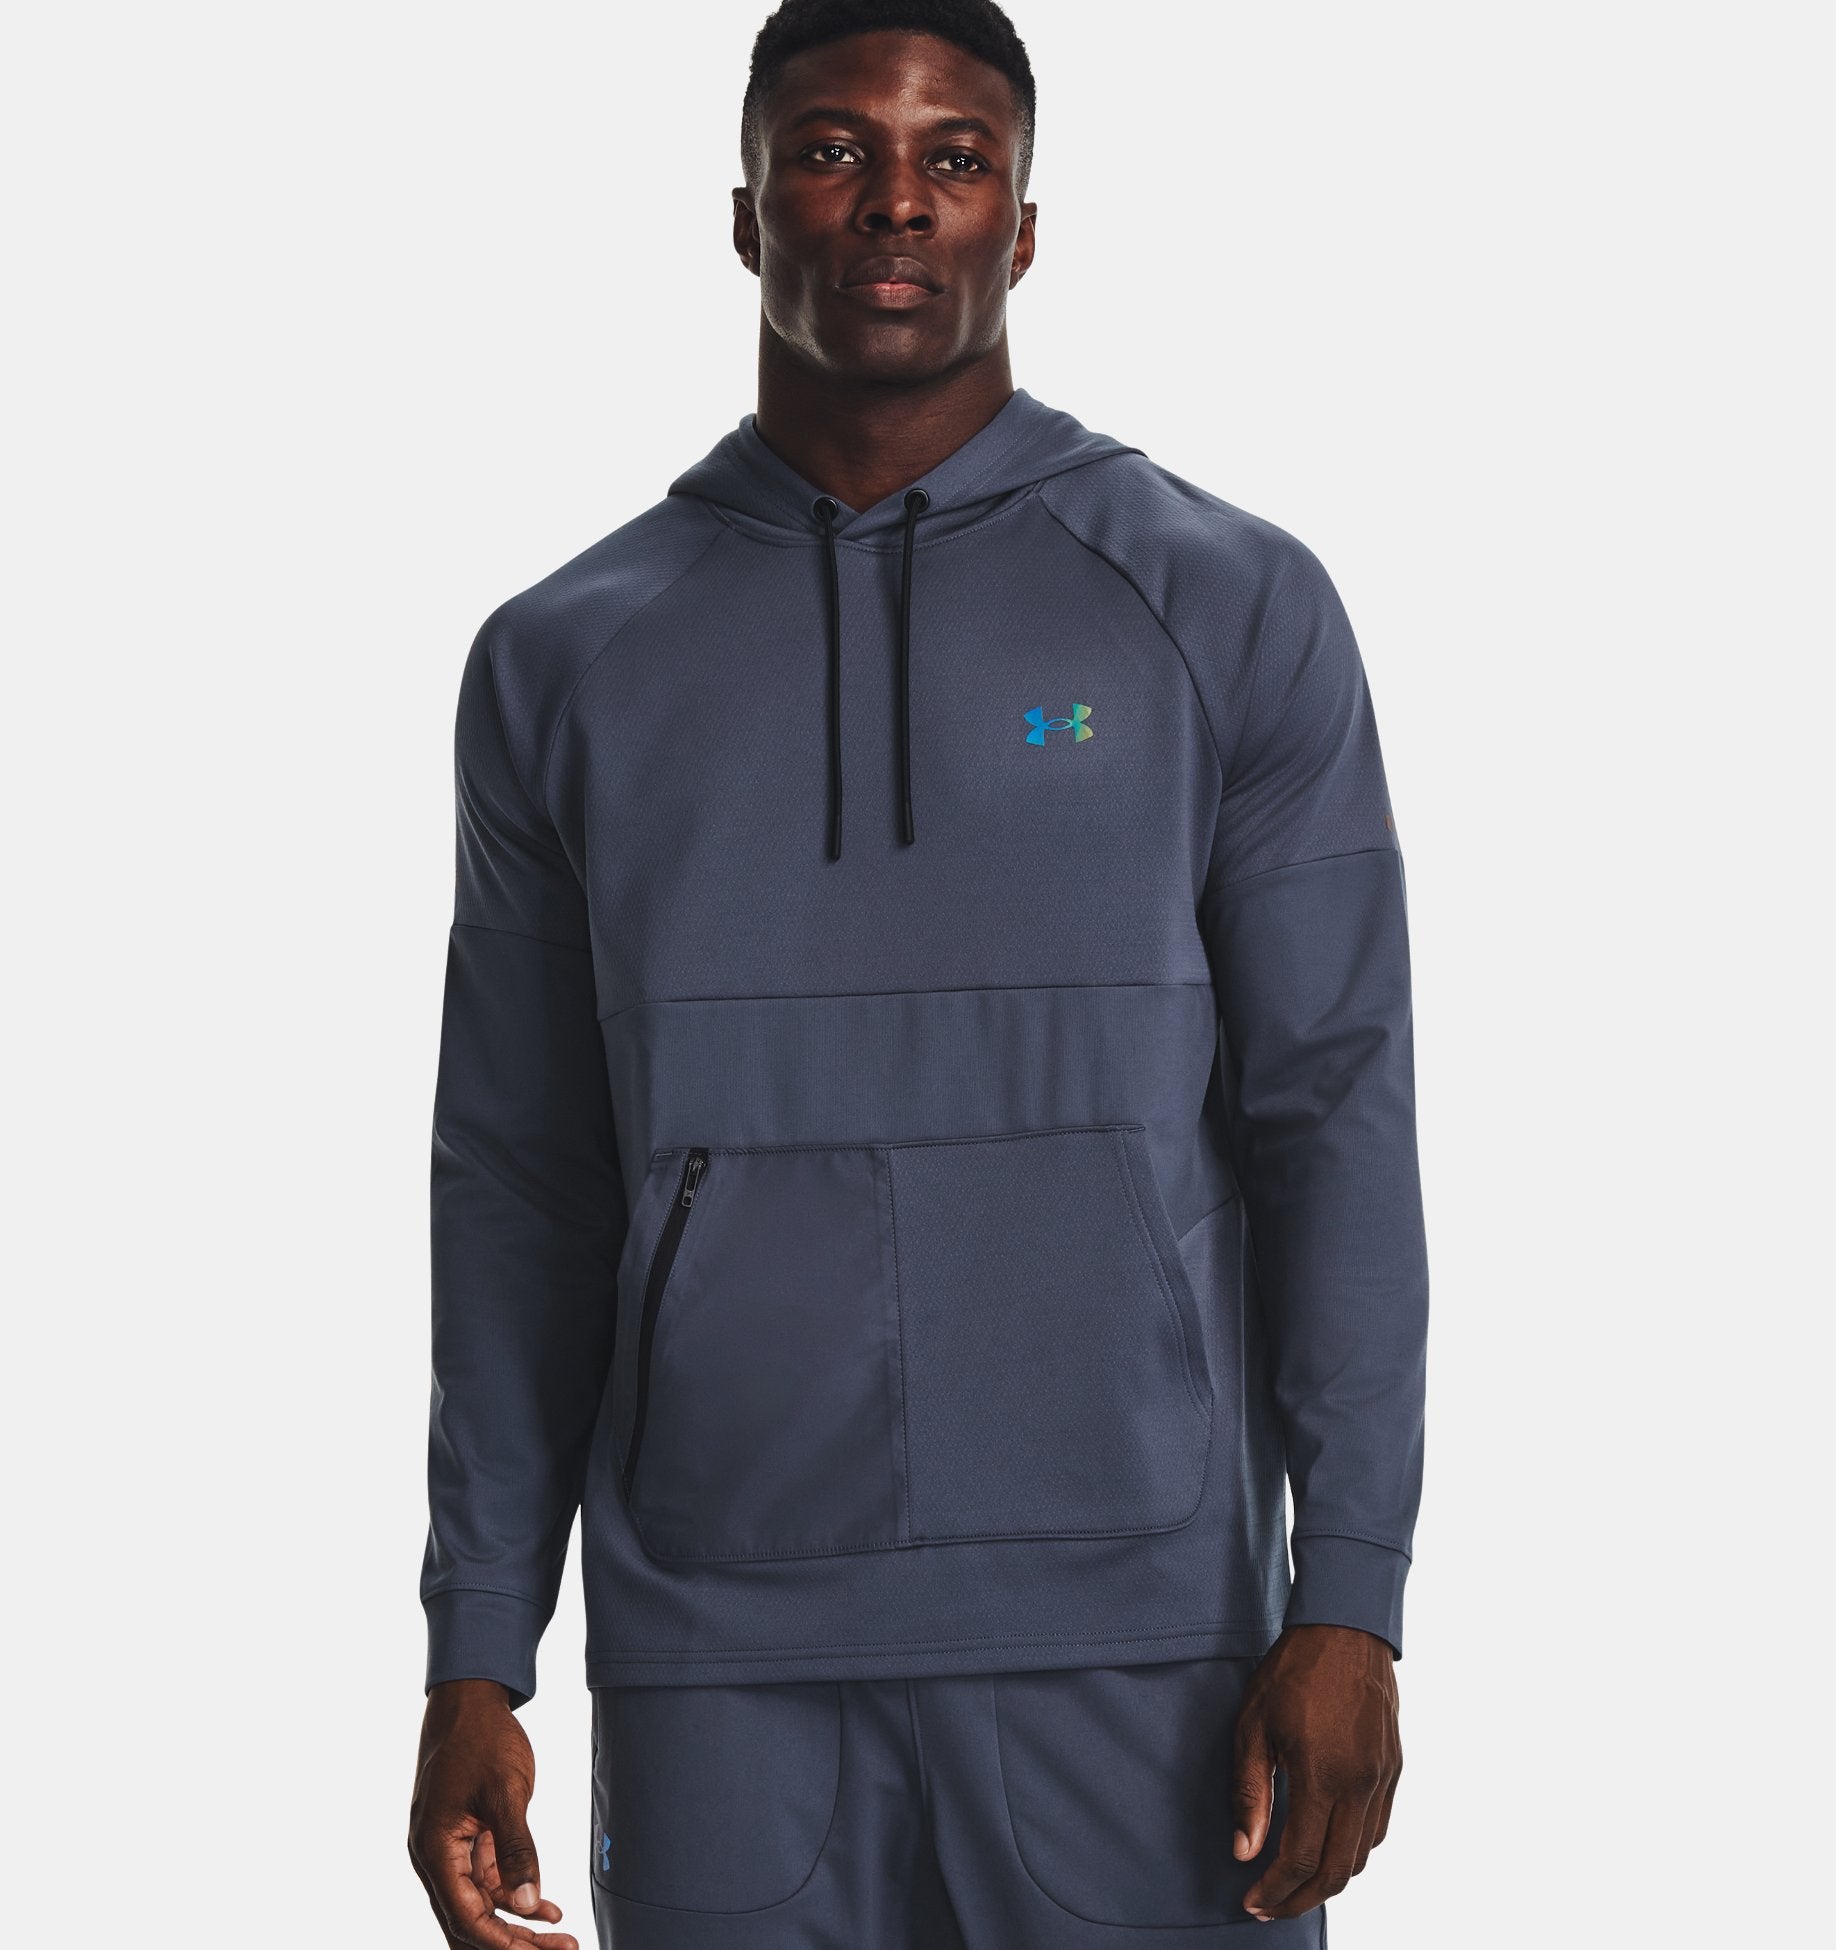 Under Armour Men's RUSH Warm-Up Hoodie – Ernie's Sports Experts